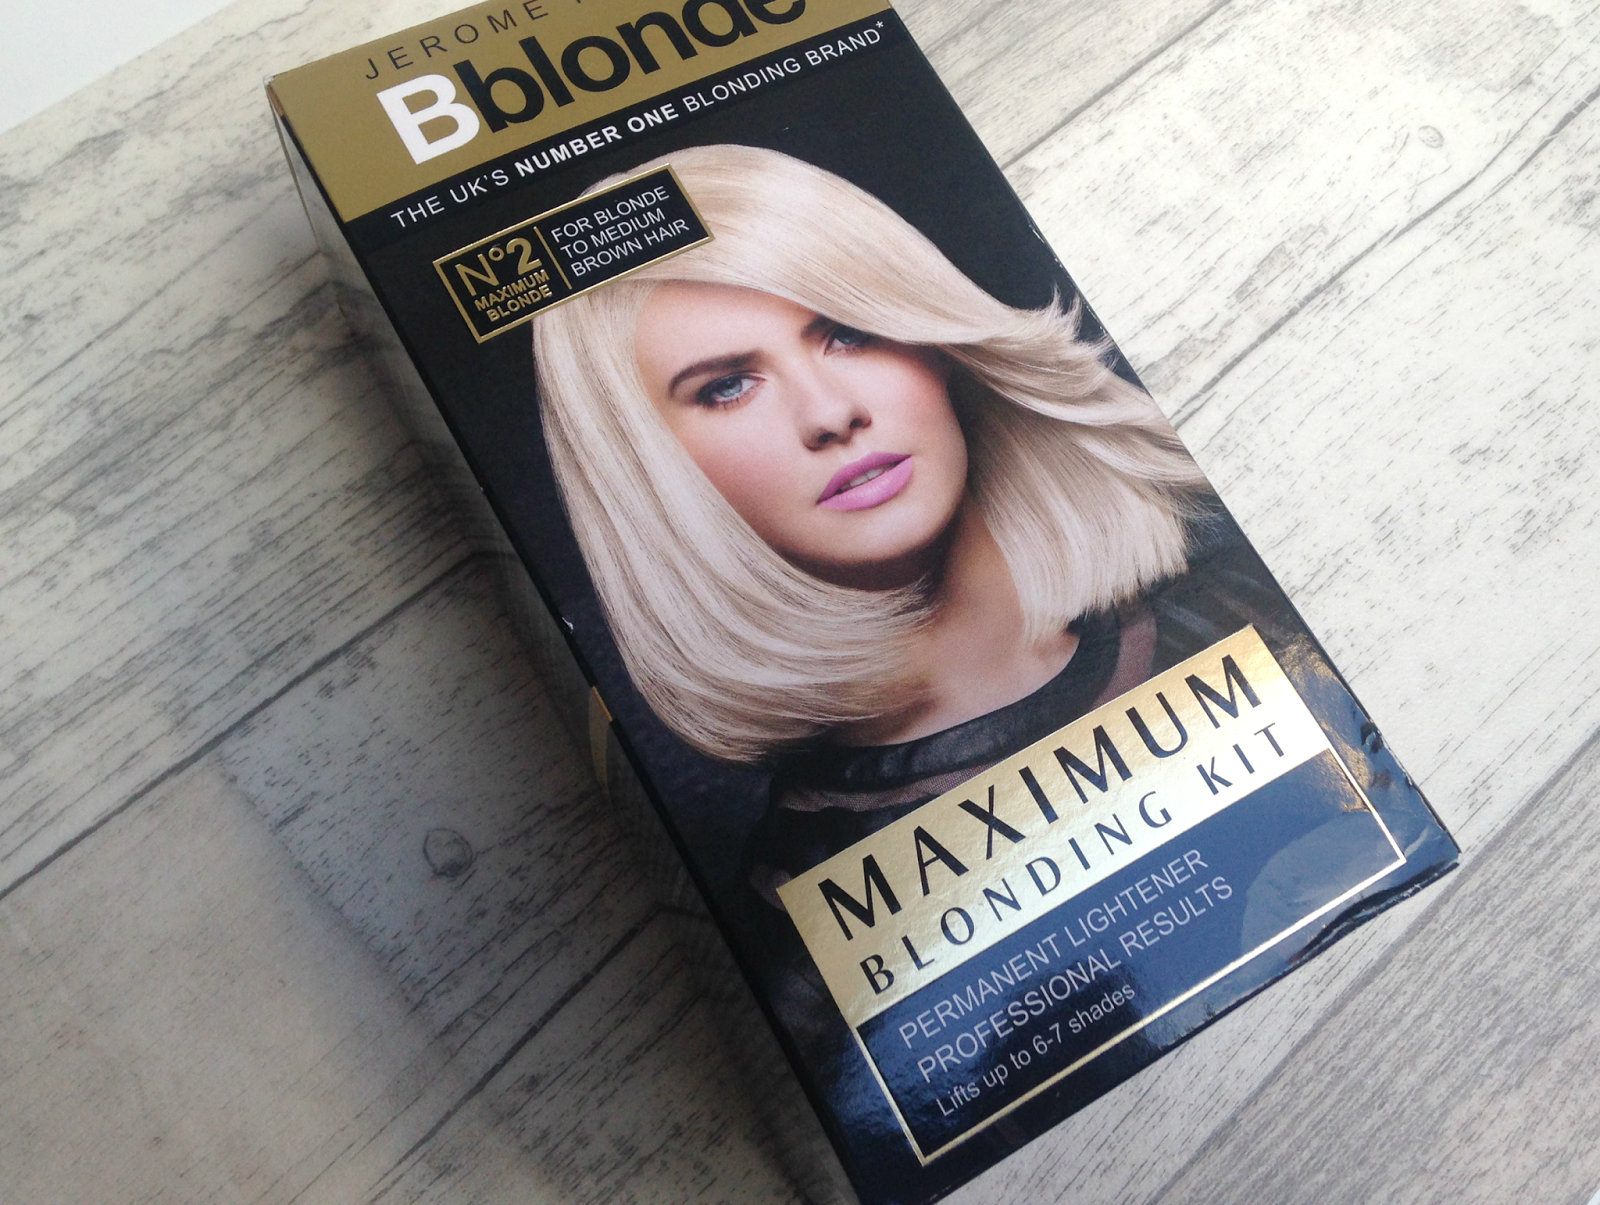 9. Jerome Russell Bblonde Maximum Highlighting Kit - wide 1